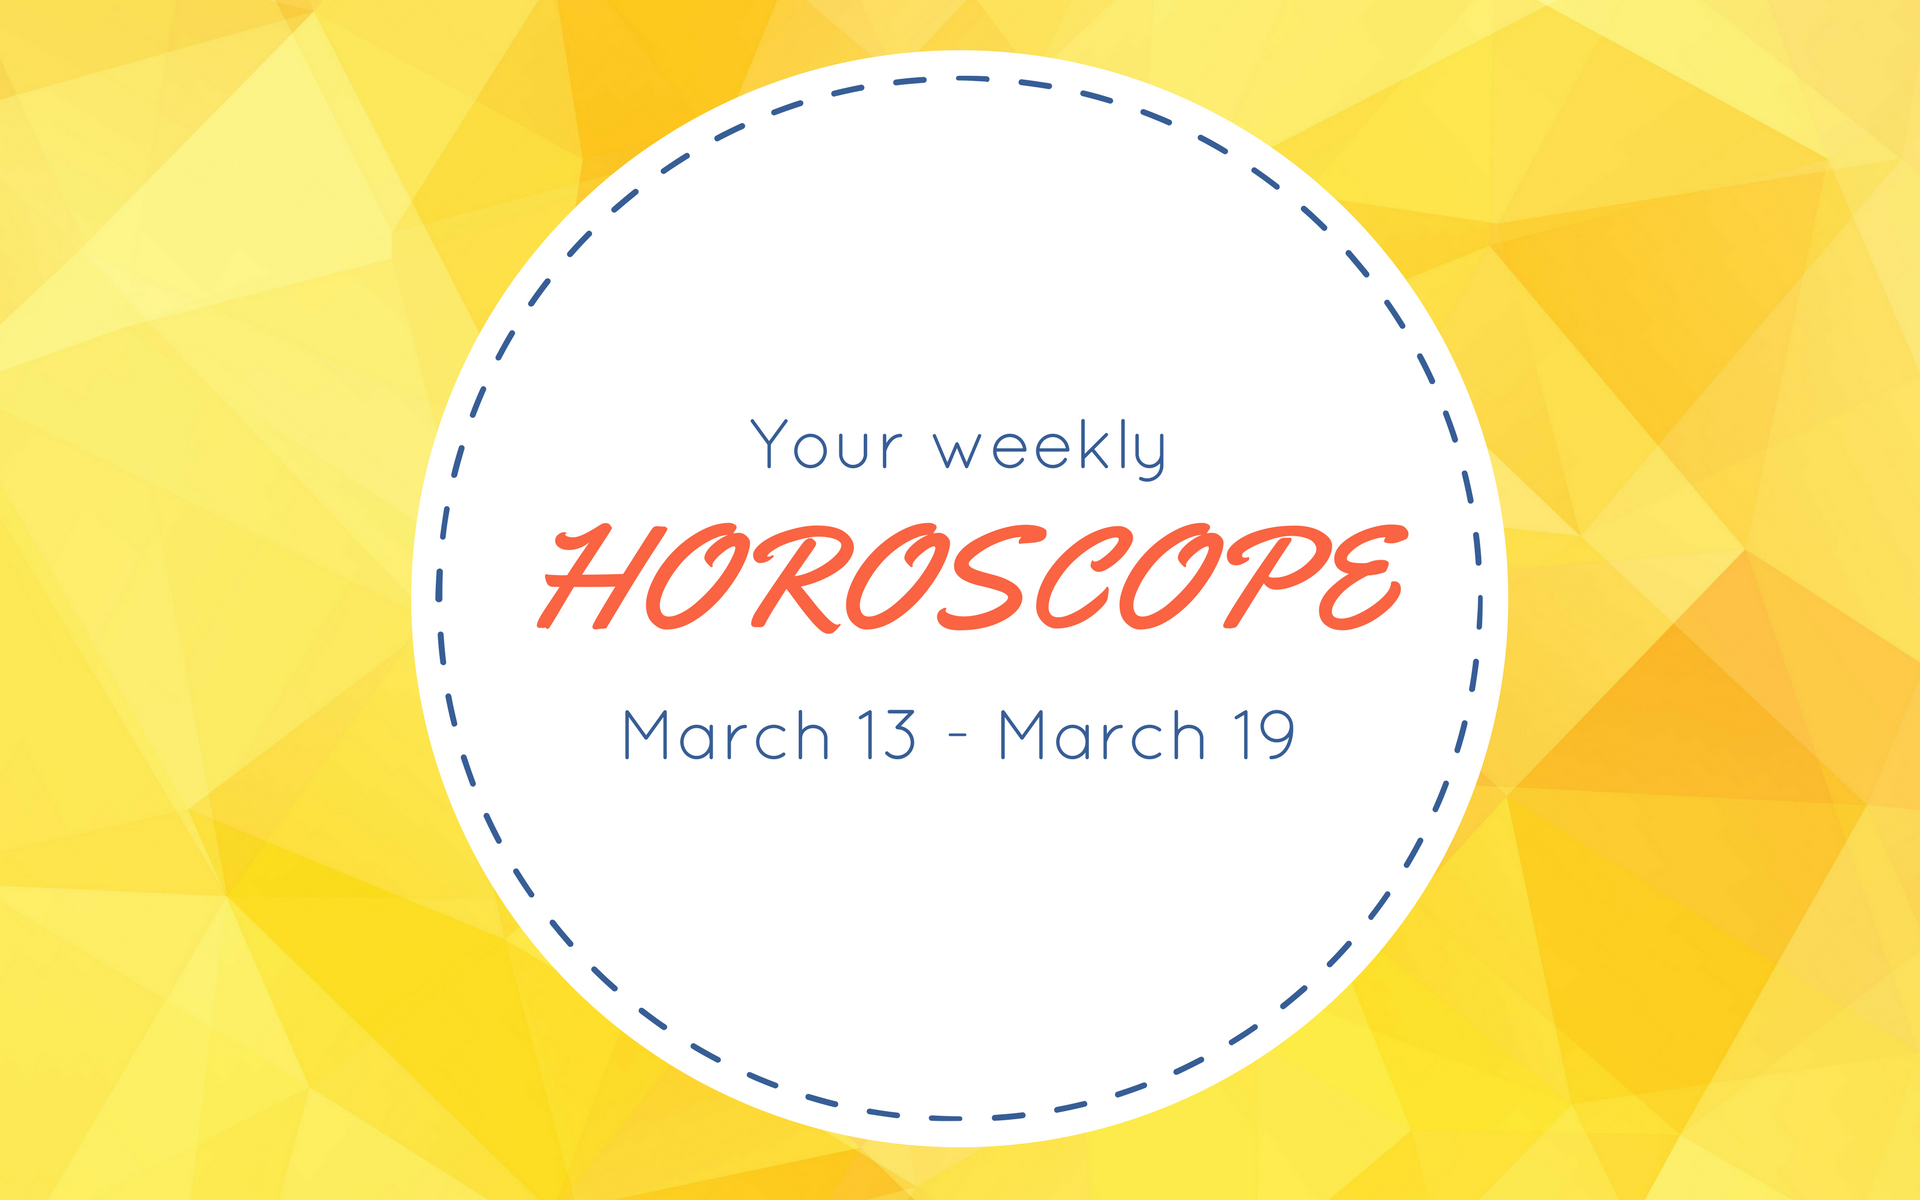 Your Weekly Horoscope: March 13 - March 19